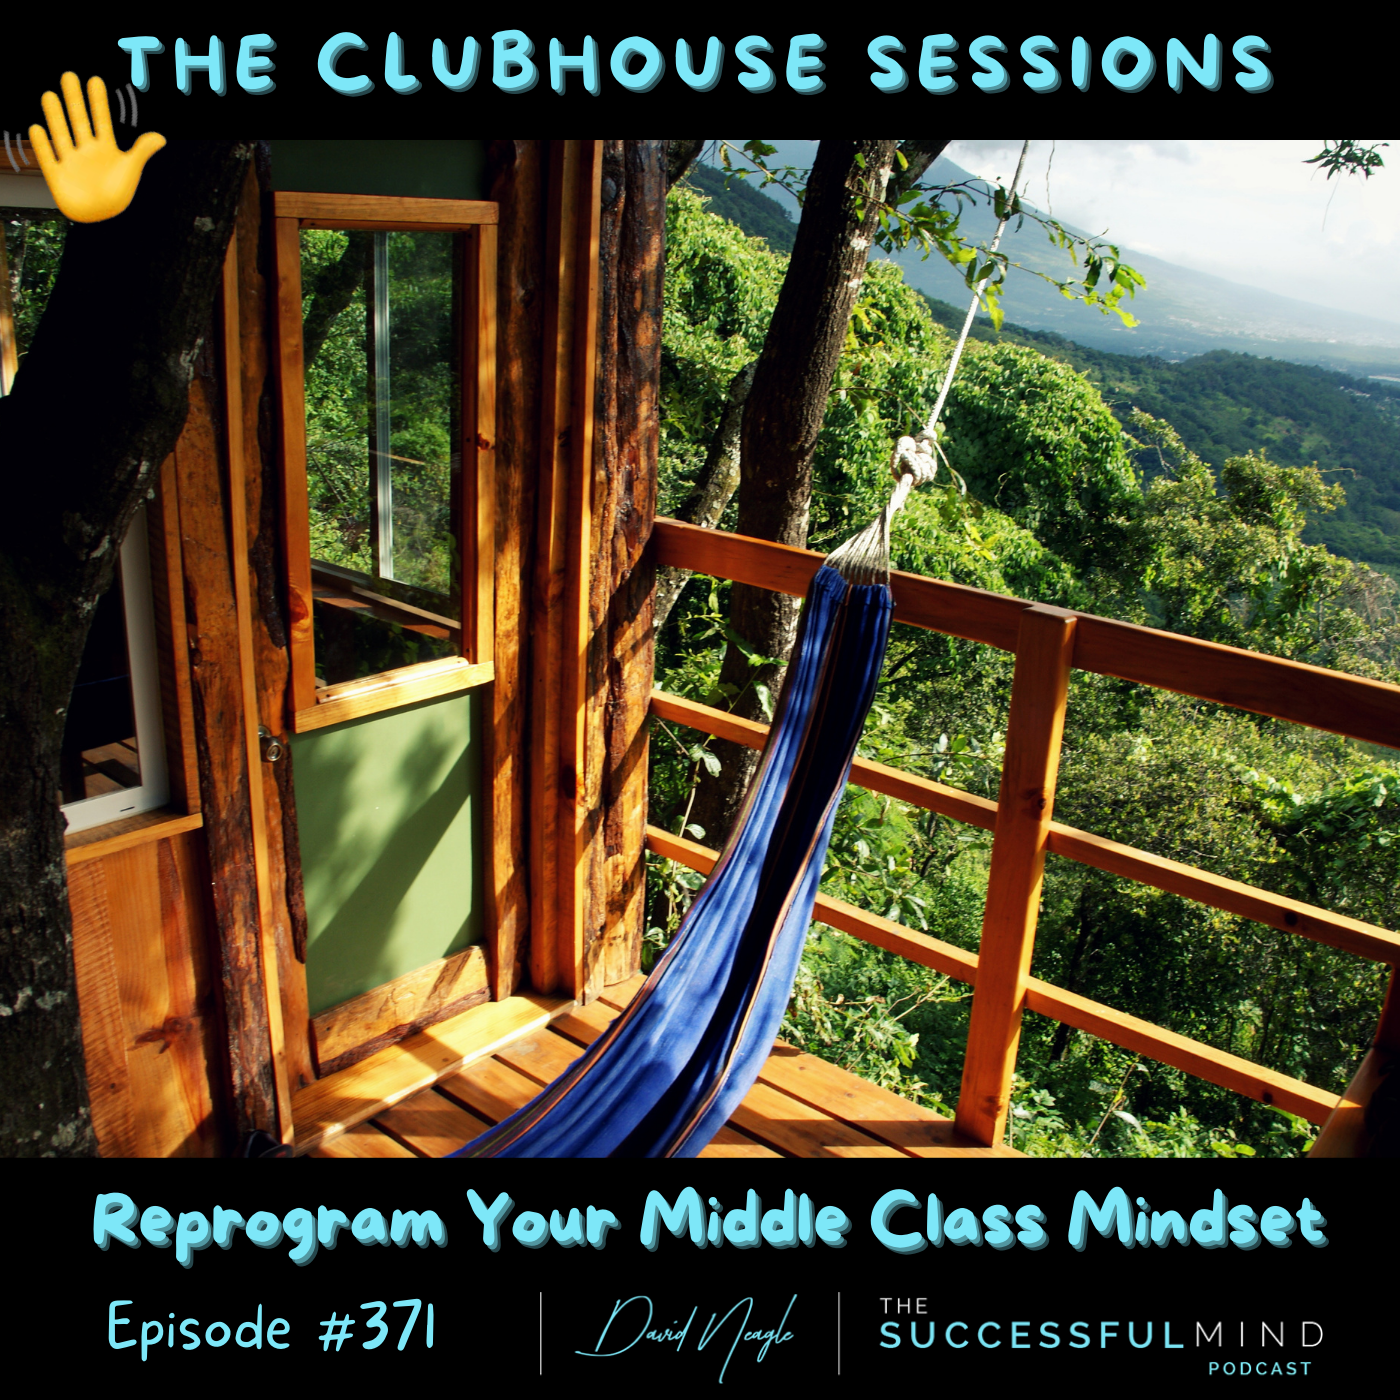 The Clubhouse Sessions - Reprogram Your Middle Class Mindset